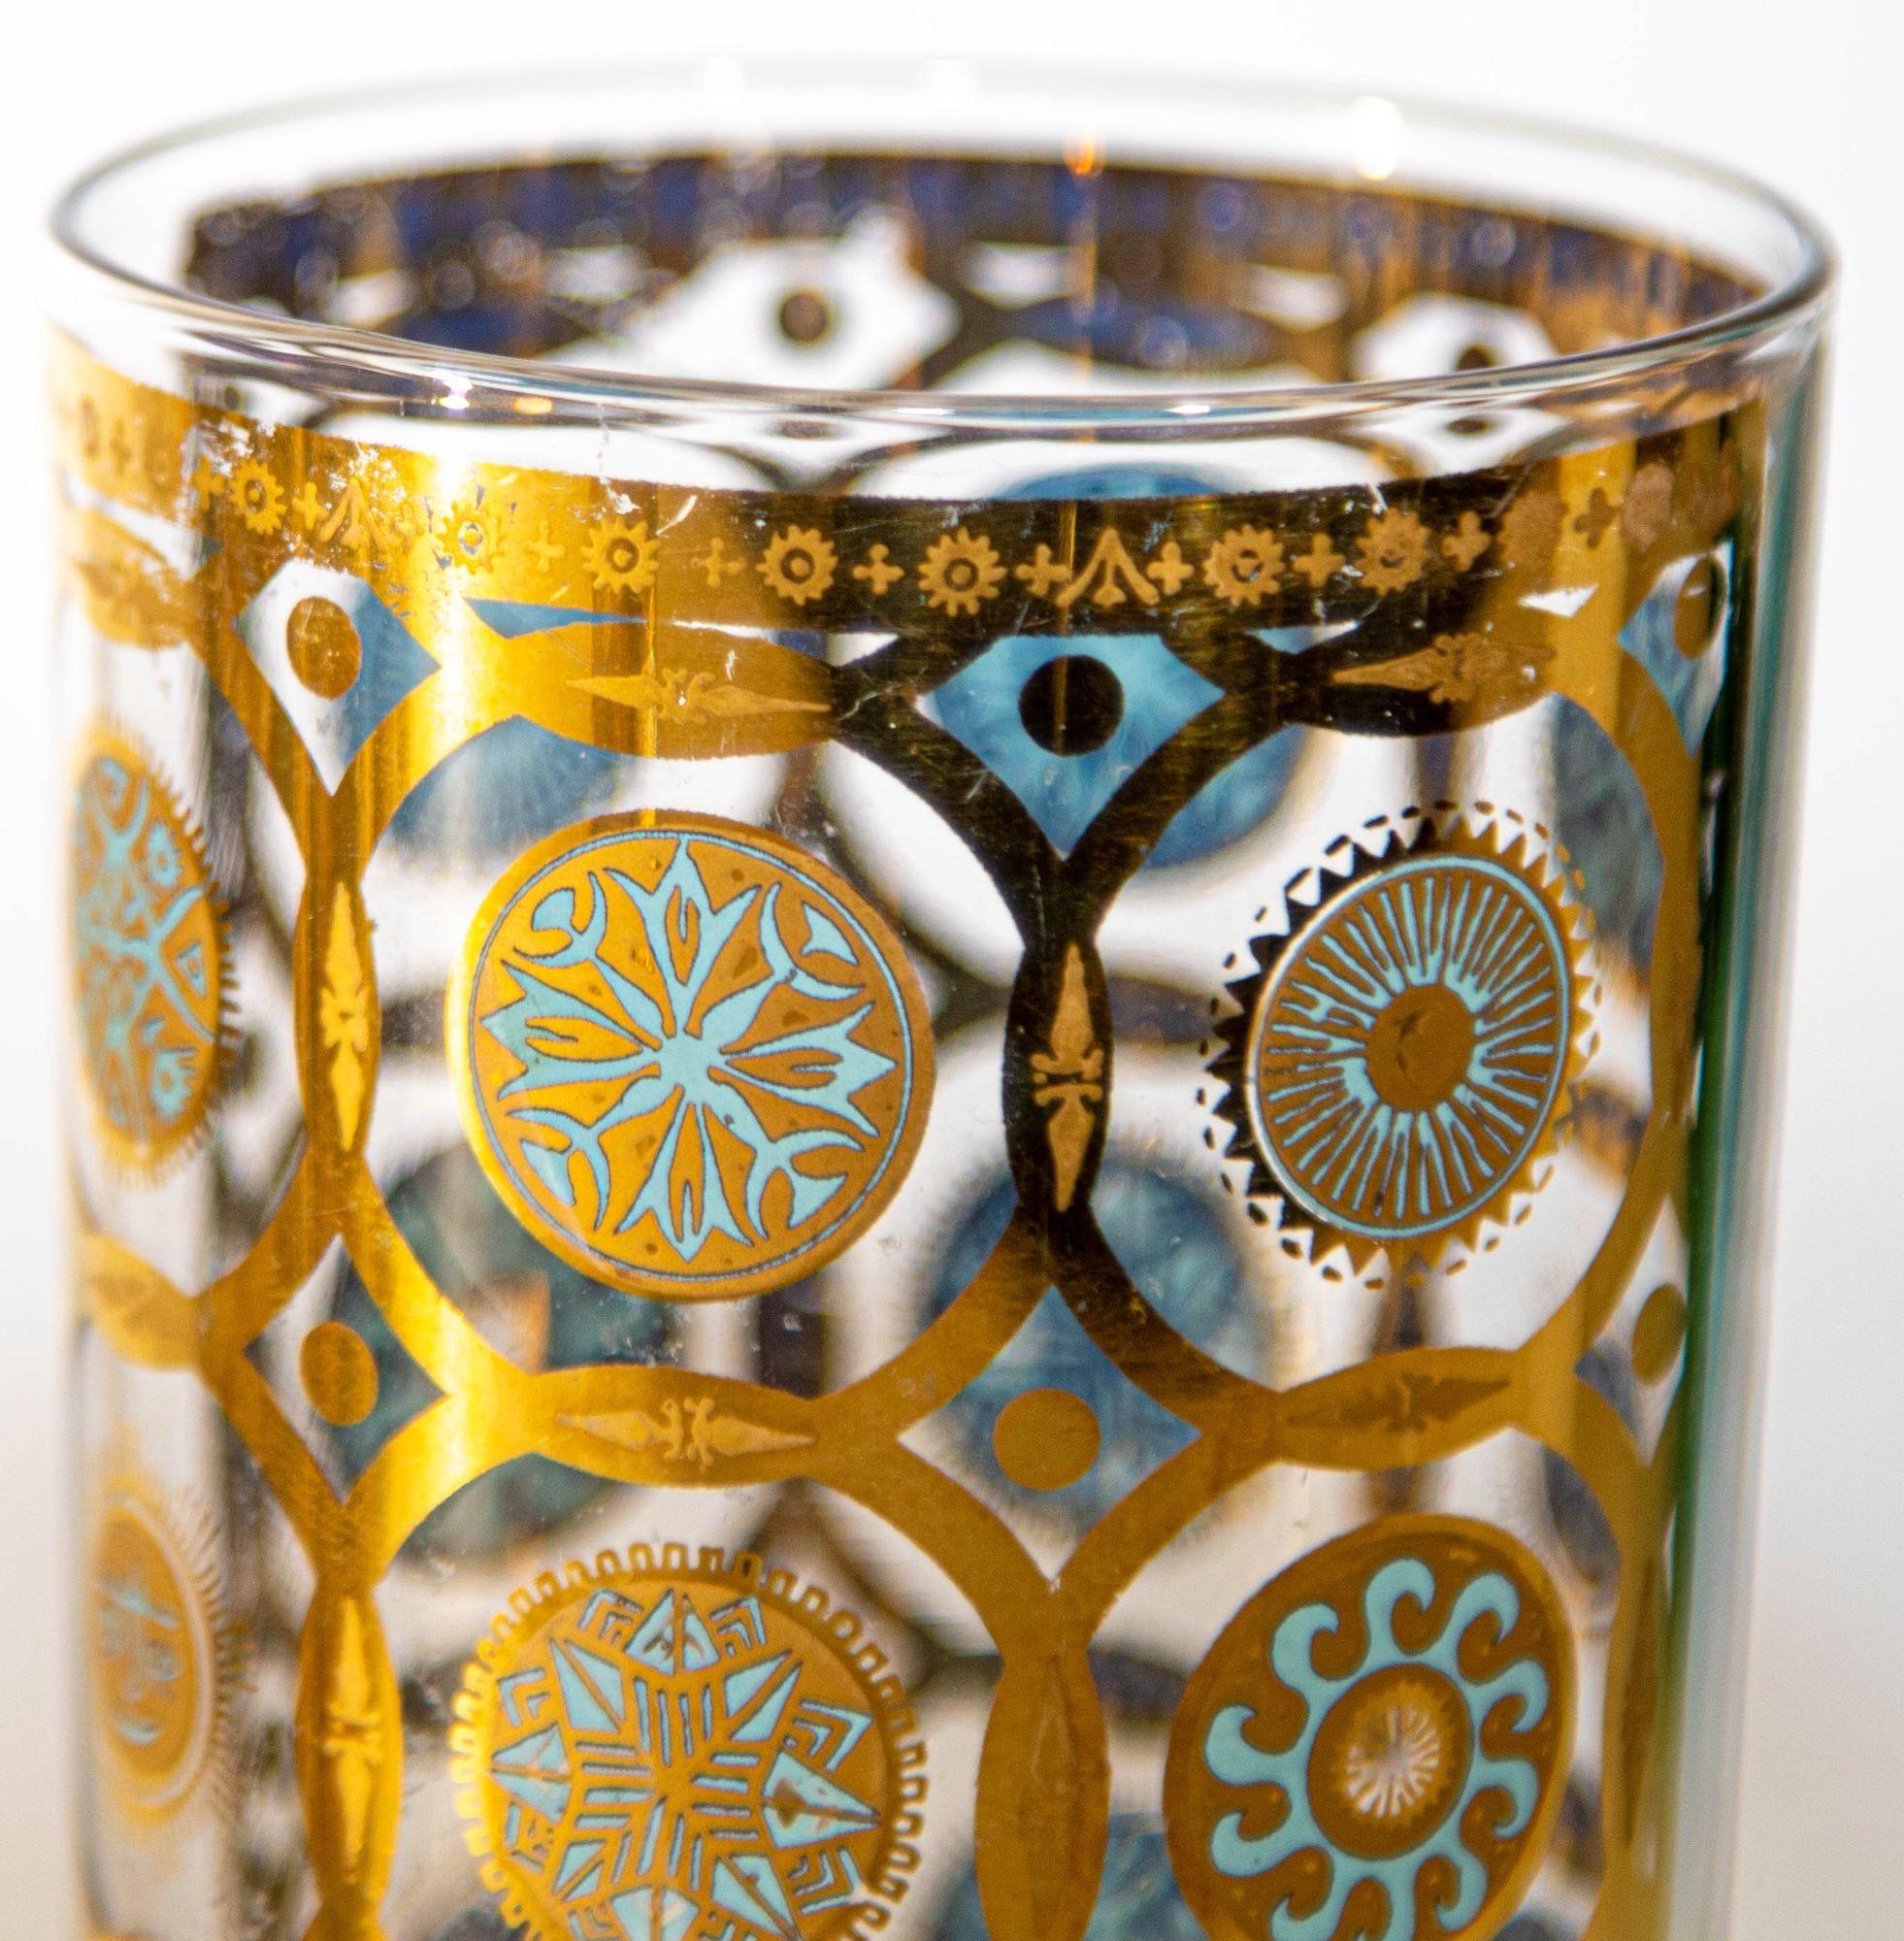 Mid-Century Modern Culver Ltd 22k Gold and Turquoise Signed Glassware Barware Set of 7, circa 1960s